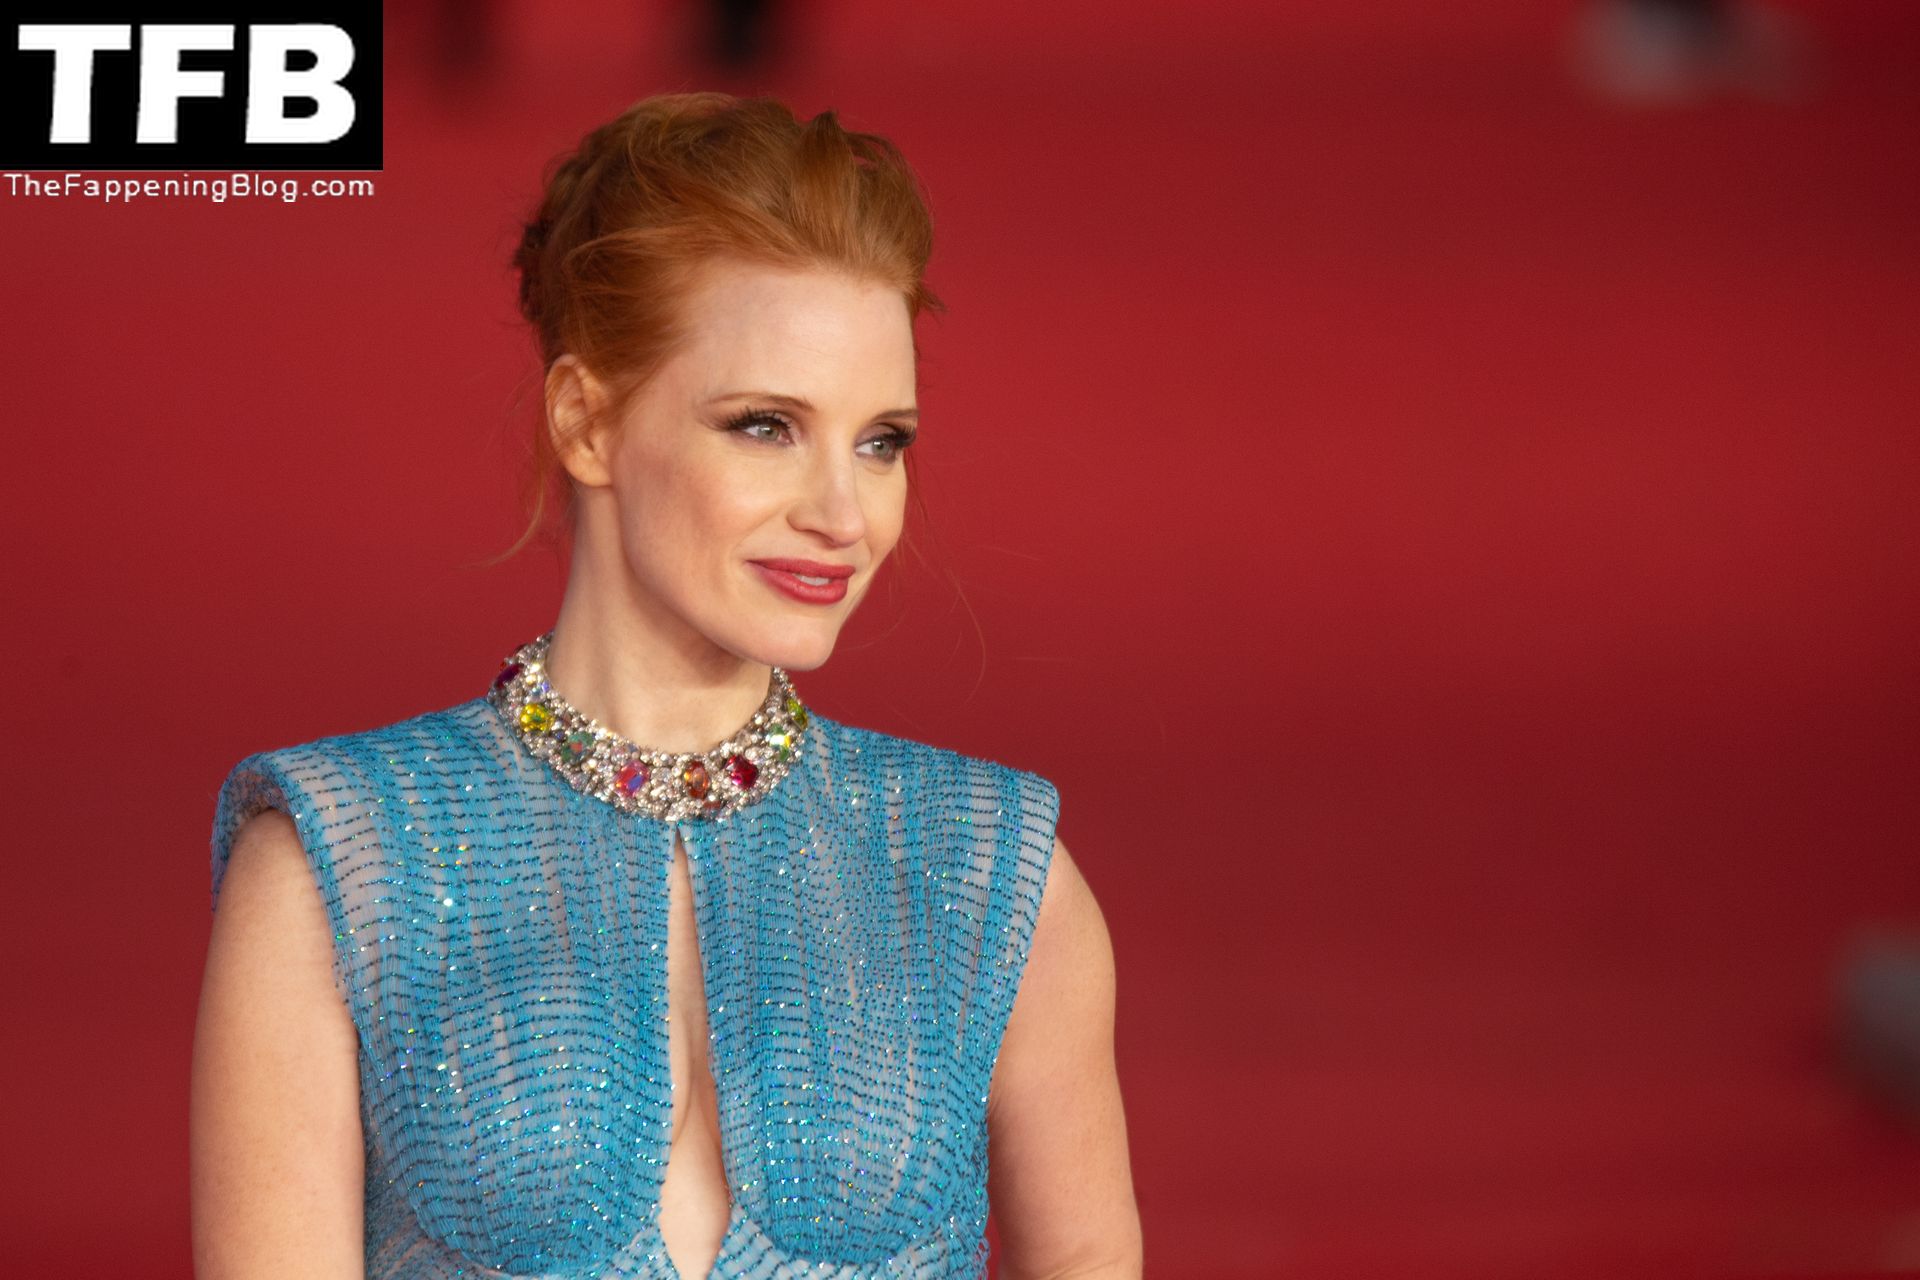 Jessica-Chastain-Sexy-The-Fappening-Blog-88.jpg